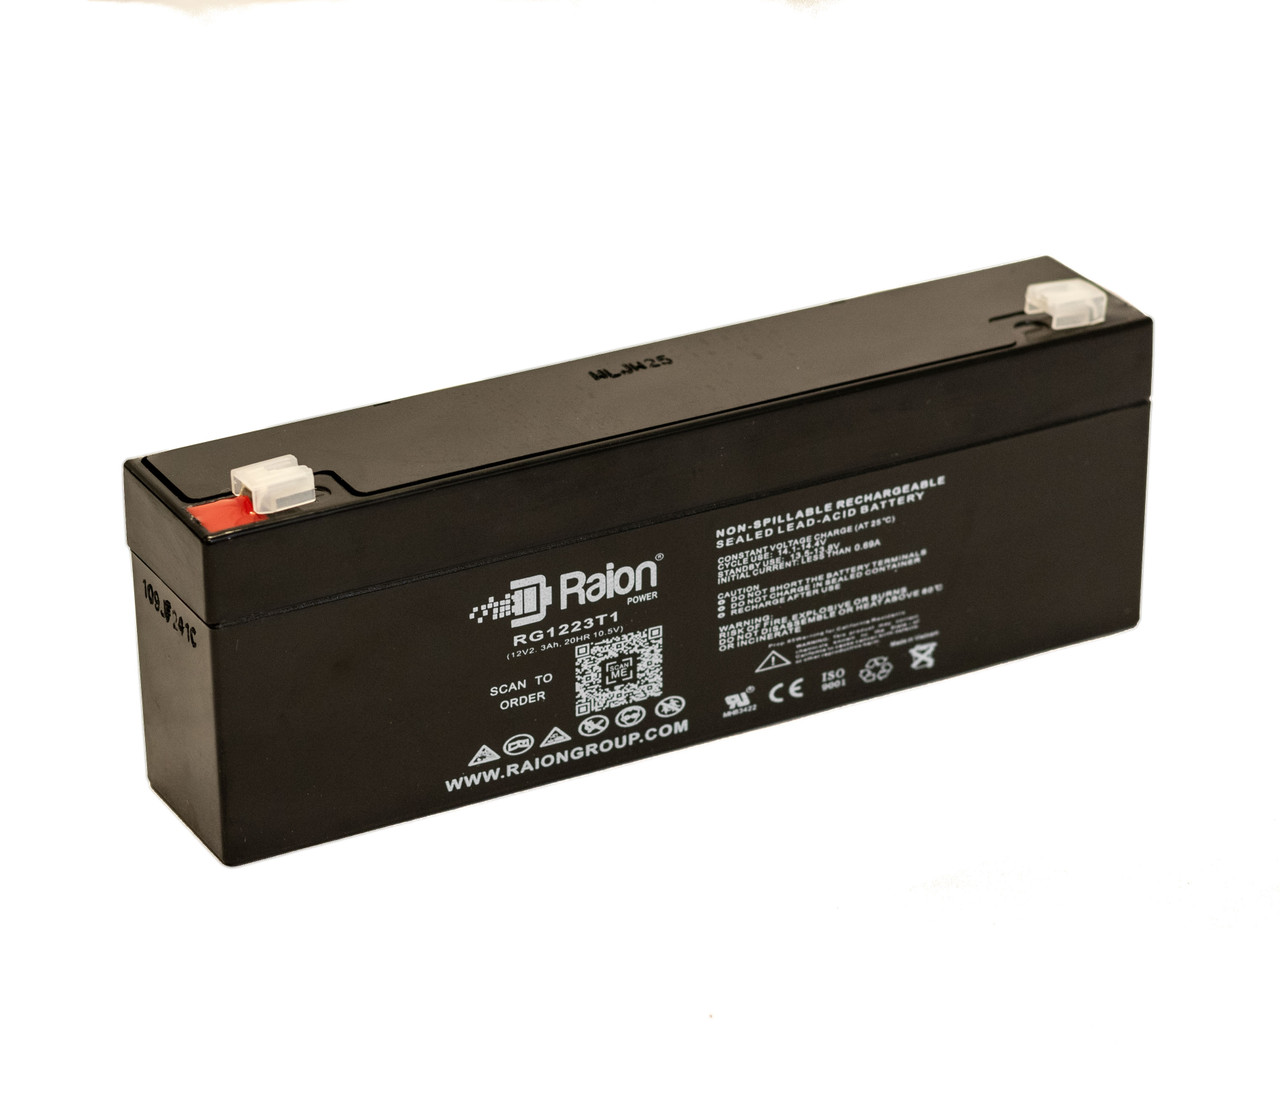 Raion Power RG1223T1 Replacement Battery for Portalac PE12V2.2Fl